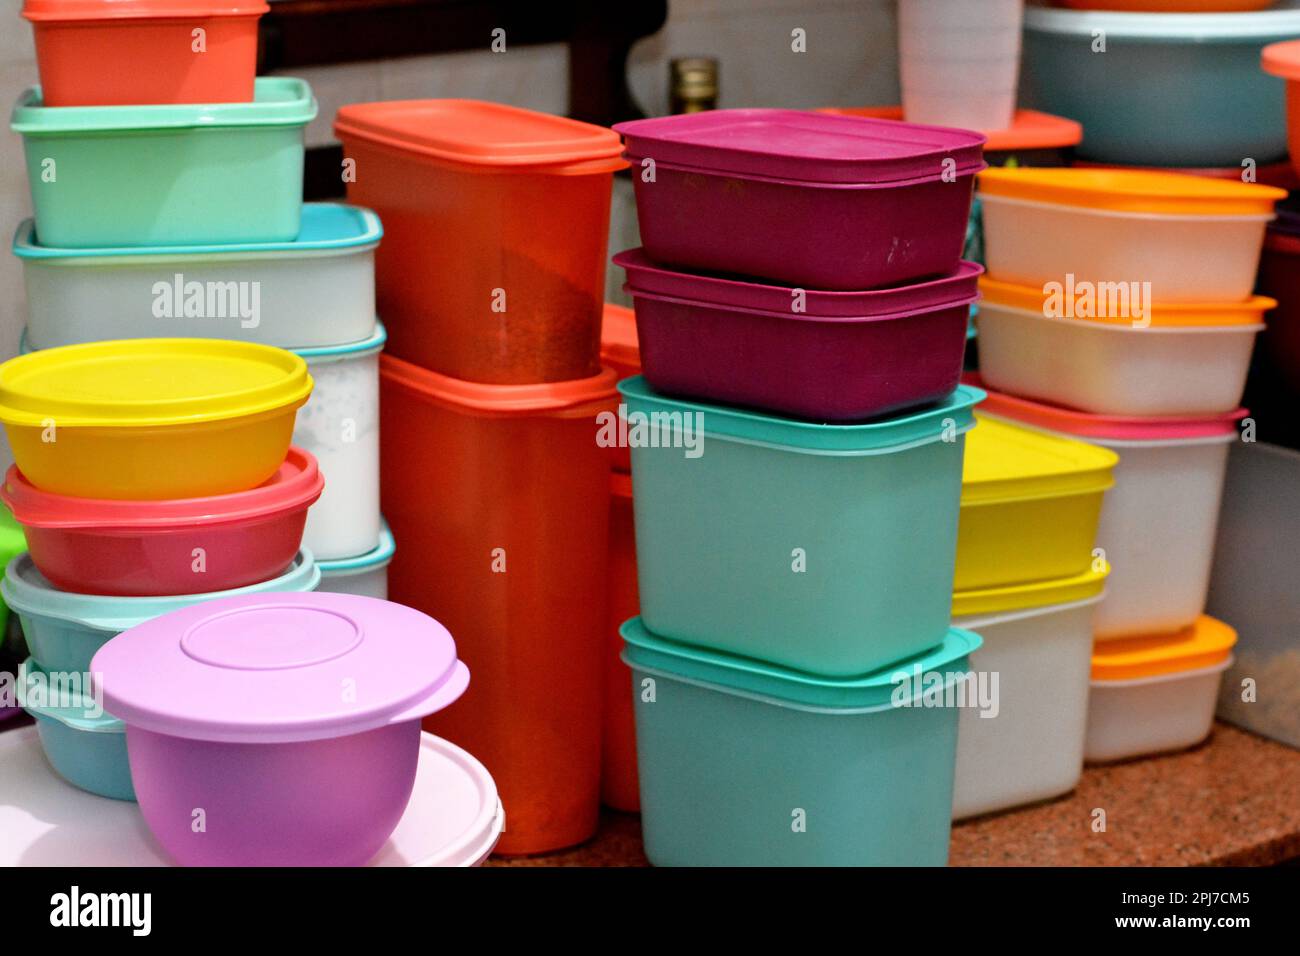 https://c8.alamy.com/comp/2PJ7CM5/cairo-egypt-february-4-2021-pile-of-several-and-many-tupperware-plastic-products-tupperware-corporation-an-american-multinational-company-produce-2PJ7CM5.jpg